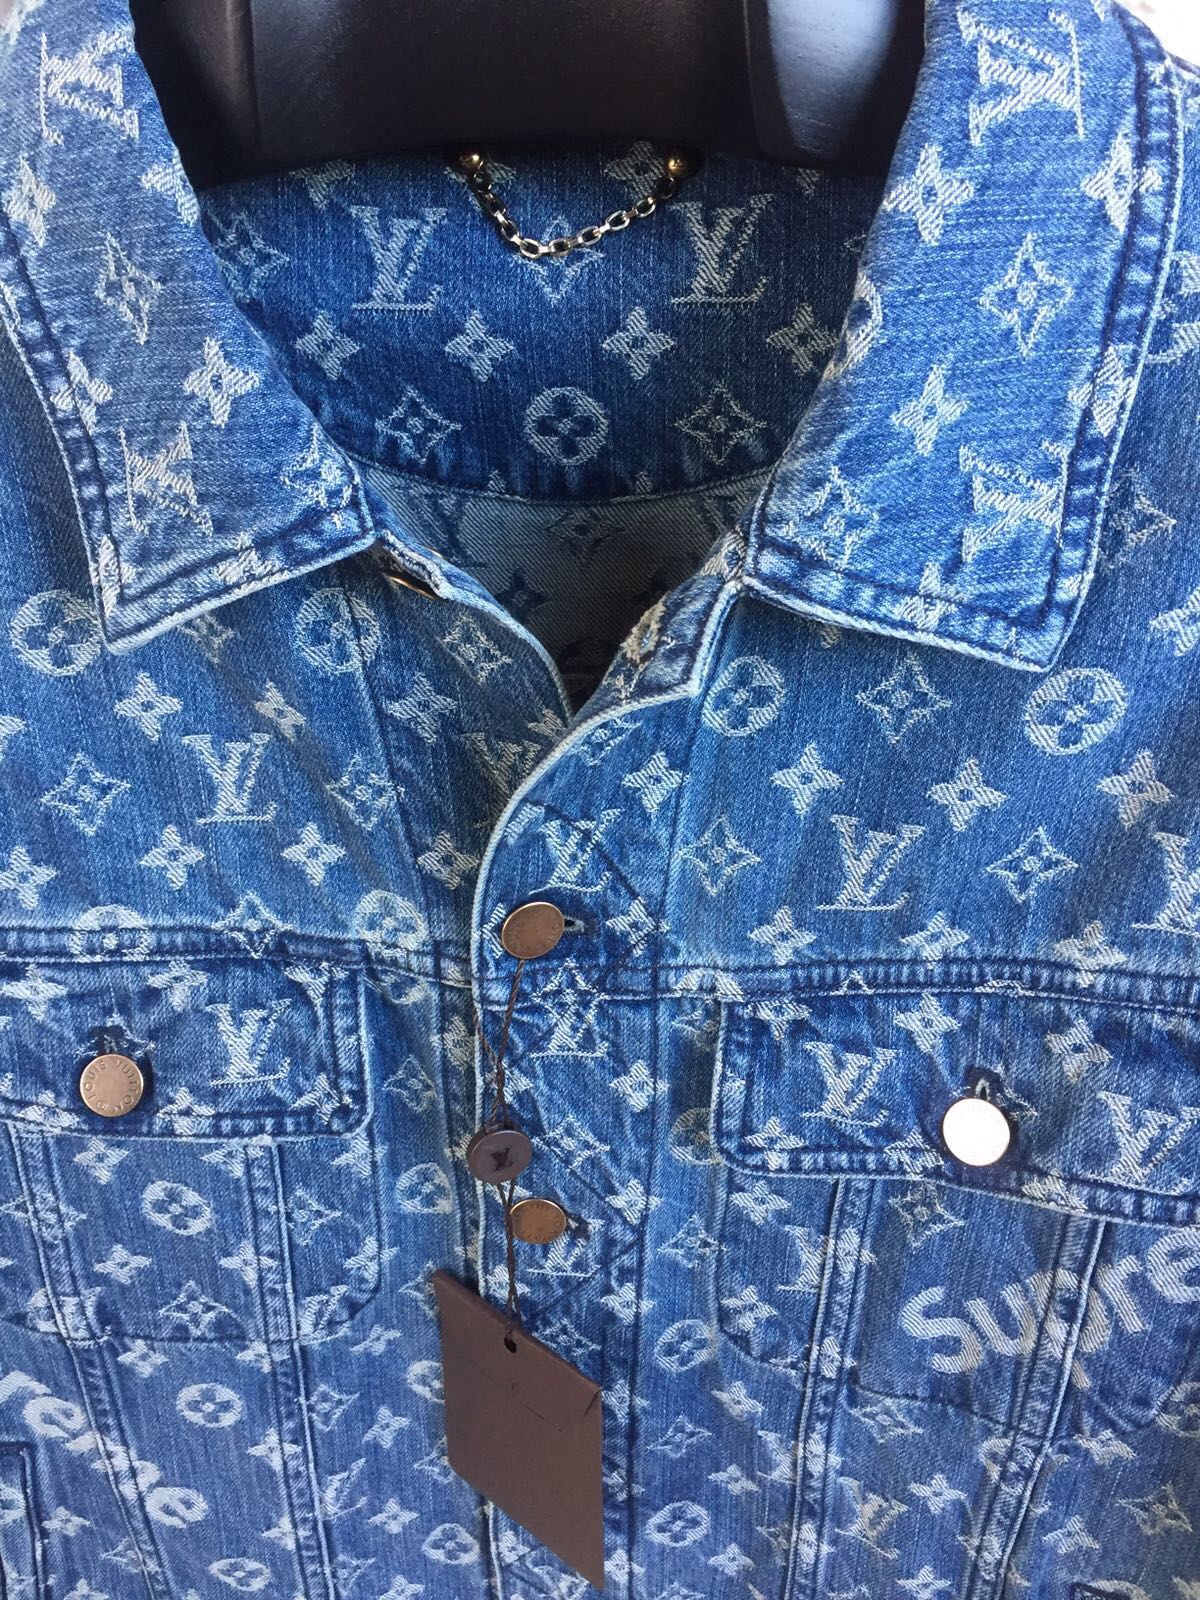 louis vuitton and supreme jacket